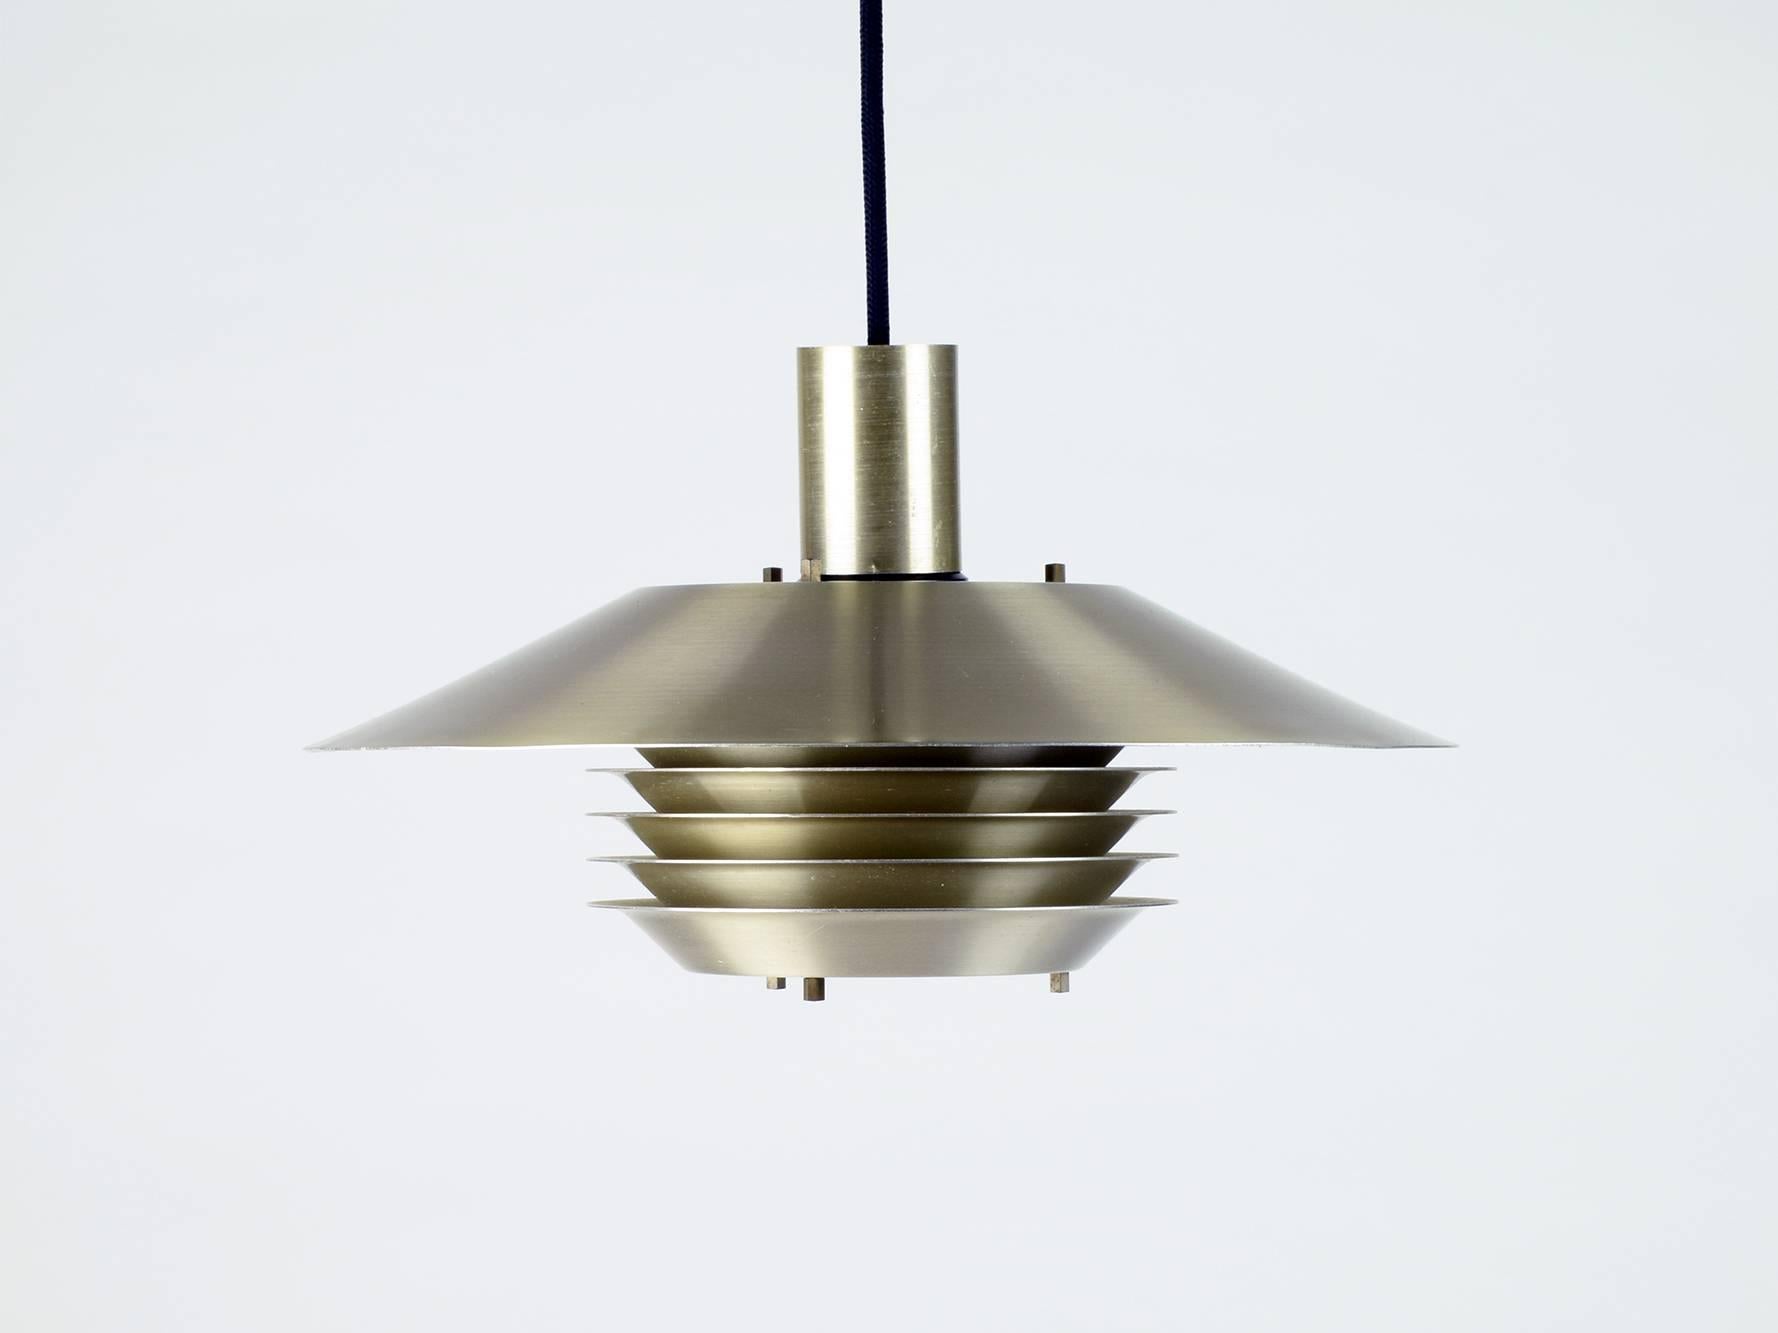 Jo Hammerborg (attributed).
Fog & Mørup (manufacturer), Denmark.
Ceiling pendant, 1960s.
Brass finish metal.

Attributed to Jo Hammerborg for Fog & Mørup because of the very similar style and technique of other lamp designs by this designer and